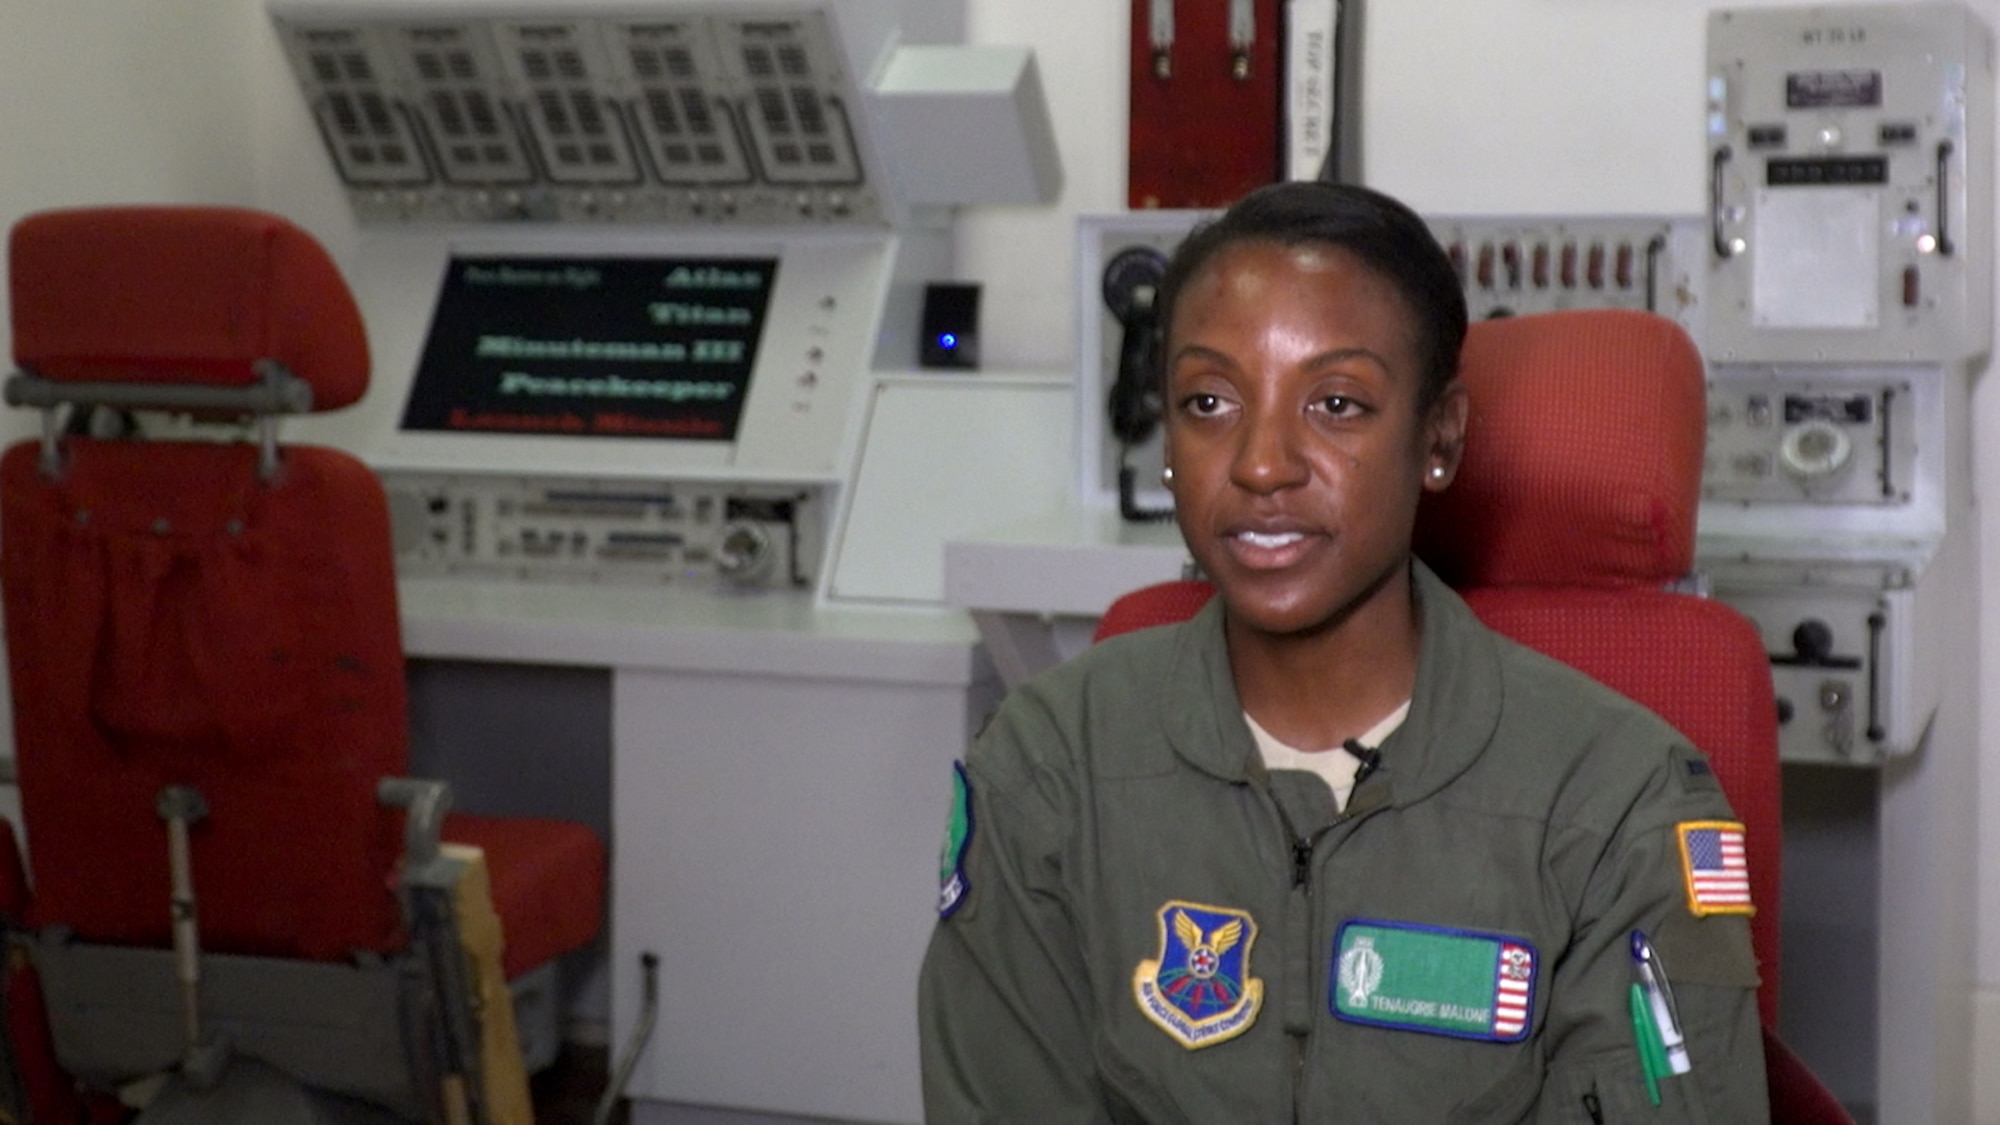 1st Lt. Tenaugrie "Ten" Malone, 321st Missile Squadron assistant flight commander, visits the F.E. Warren base museum, Wyoming, April 26, 2019. She shares her story behind being awarded the Air Force Global Strike Command, NAACP Roy Wilkins Renowned Service Award.(U.S. Air Force photo by 1st Lt. Nikita Thorpe)